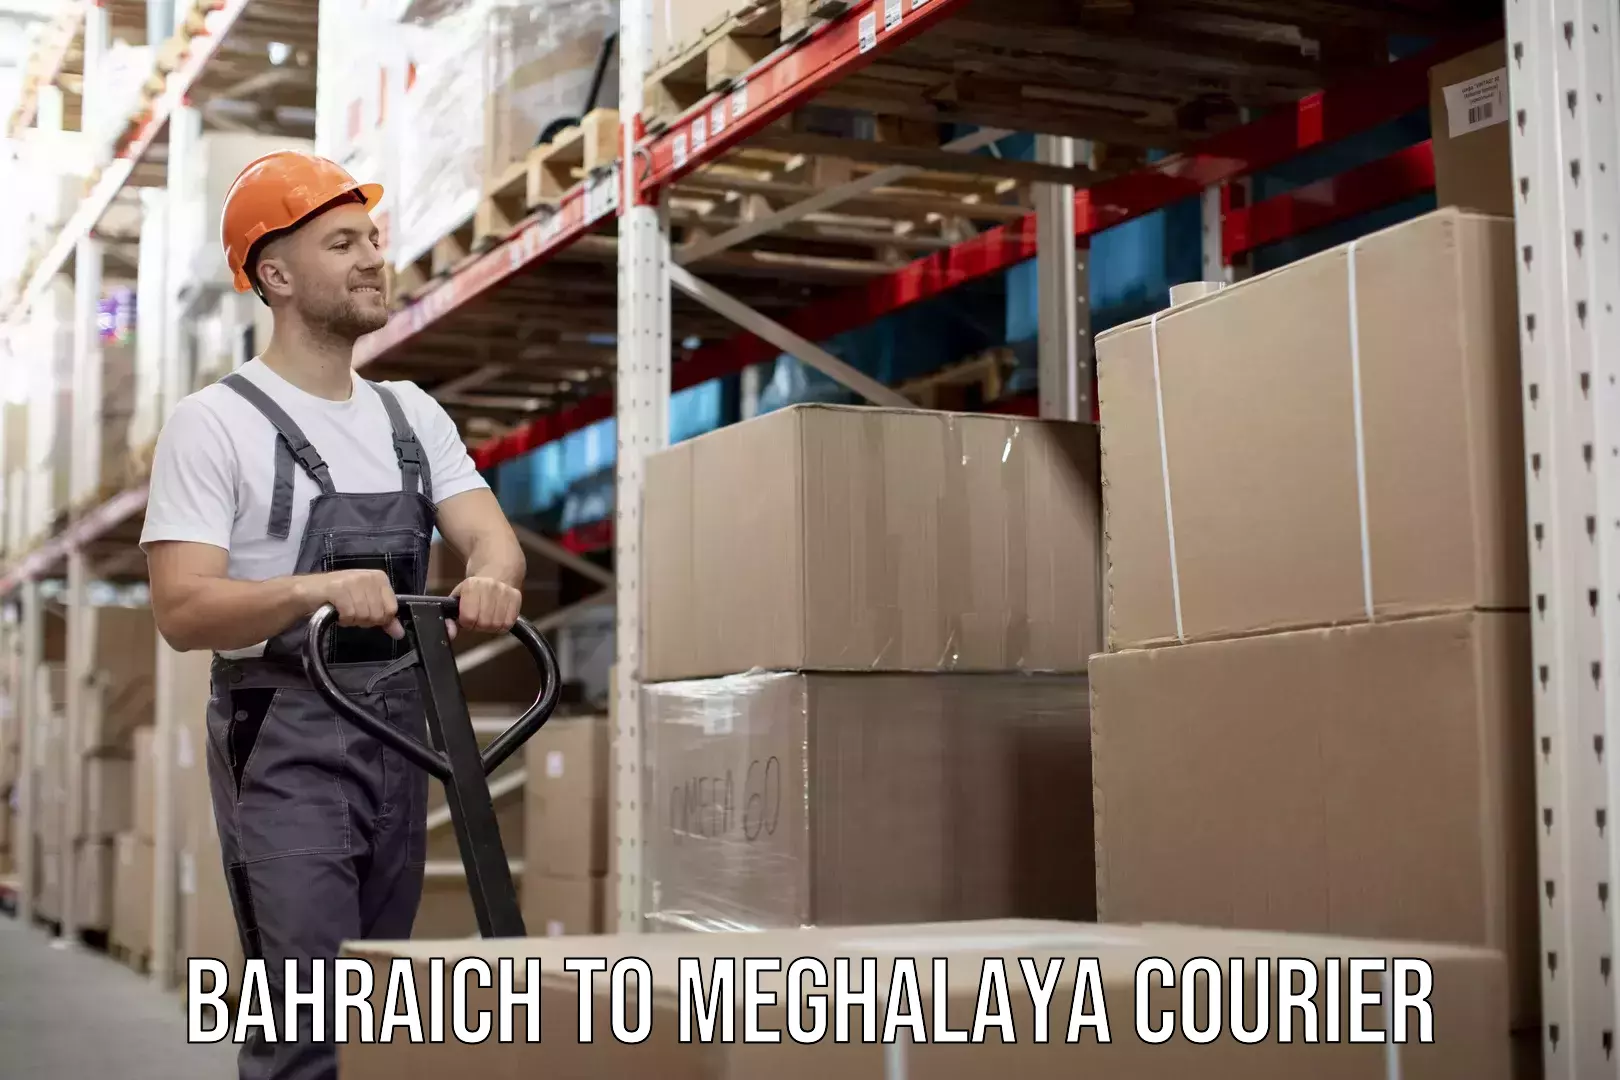 Local delivery service Bahraich to Meghalaya